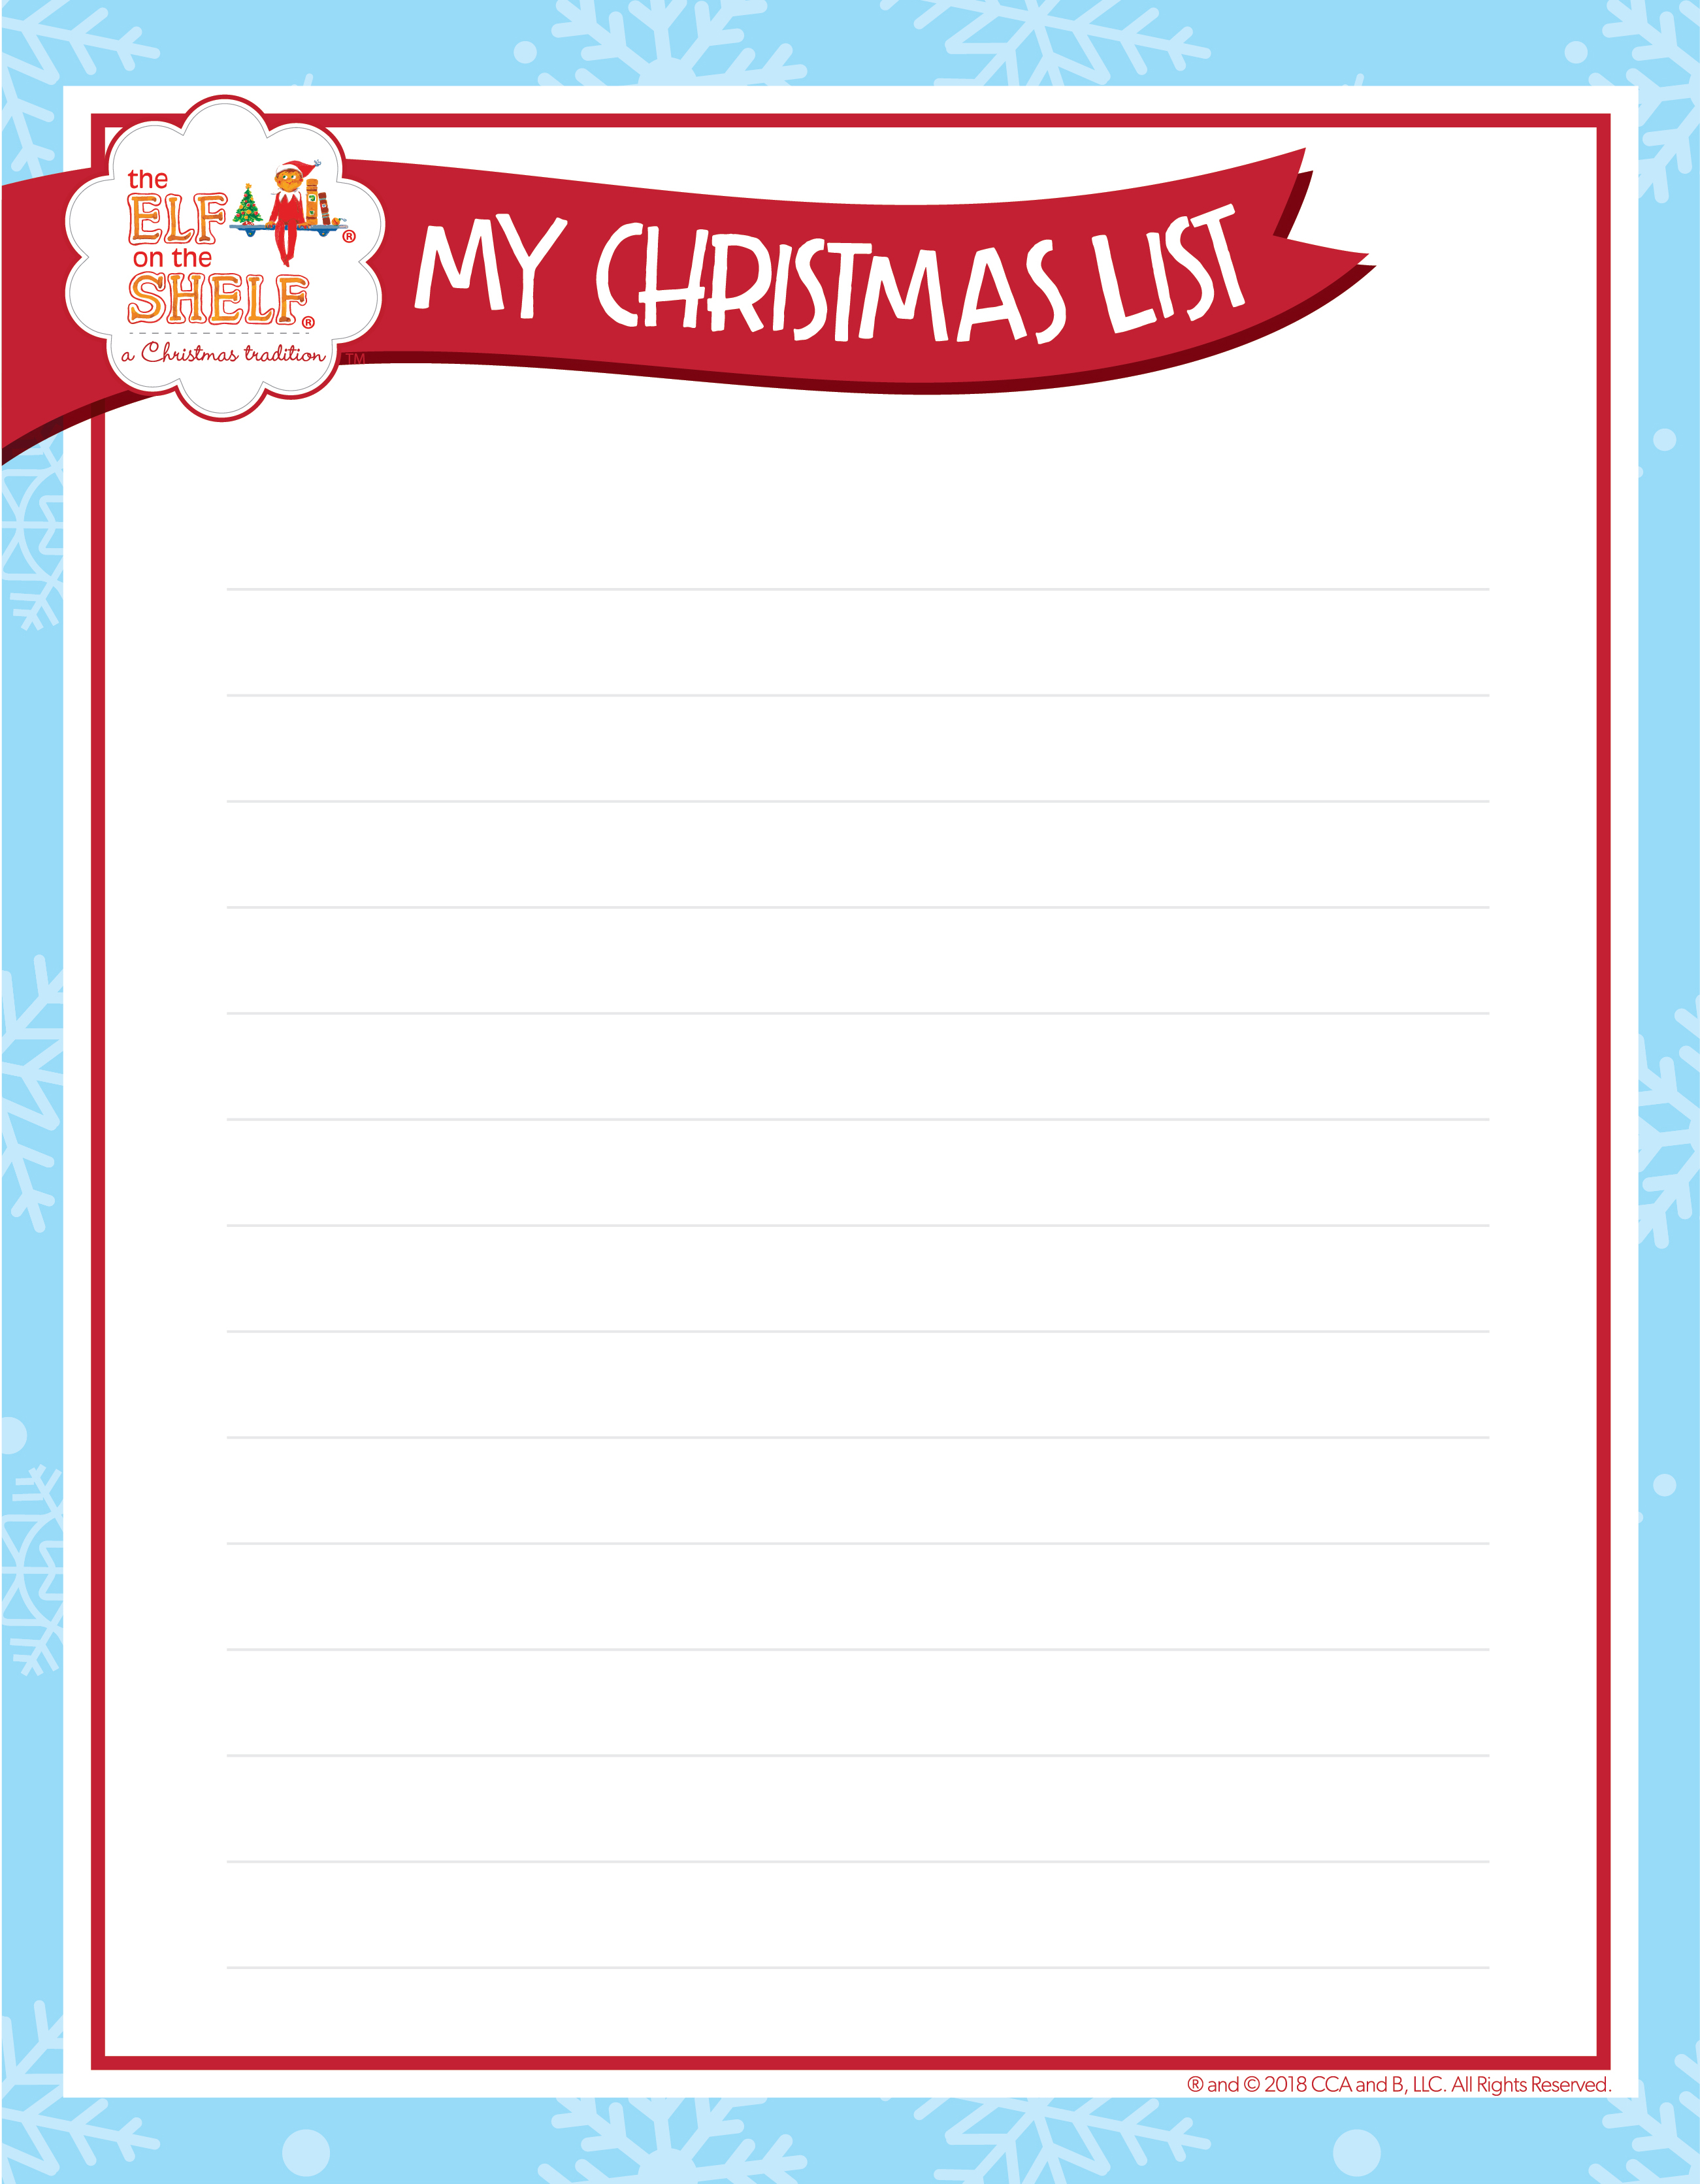 Use This Free Stationery to Write Your List to Santa The Elf on the Shelf